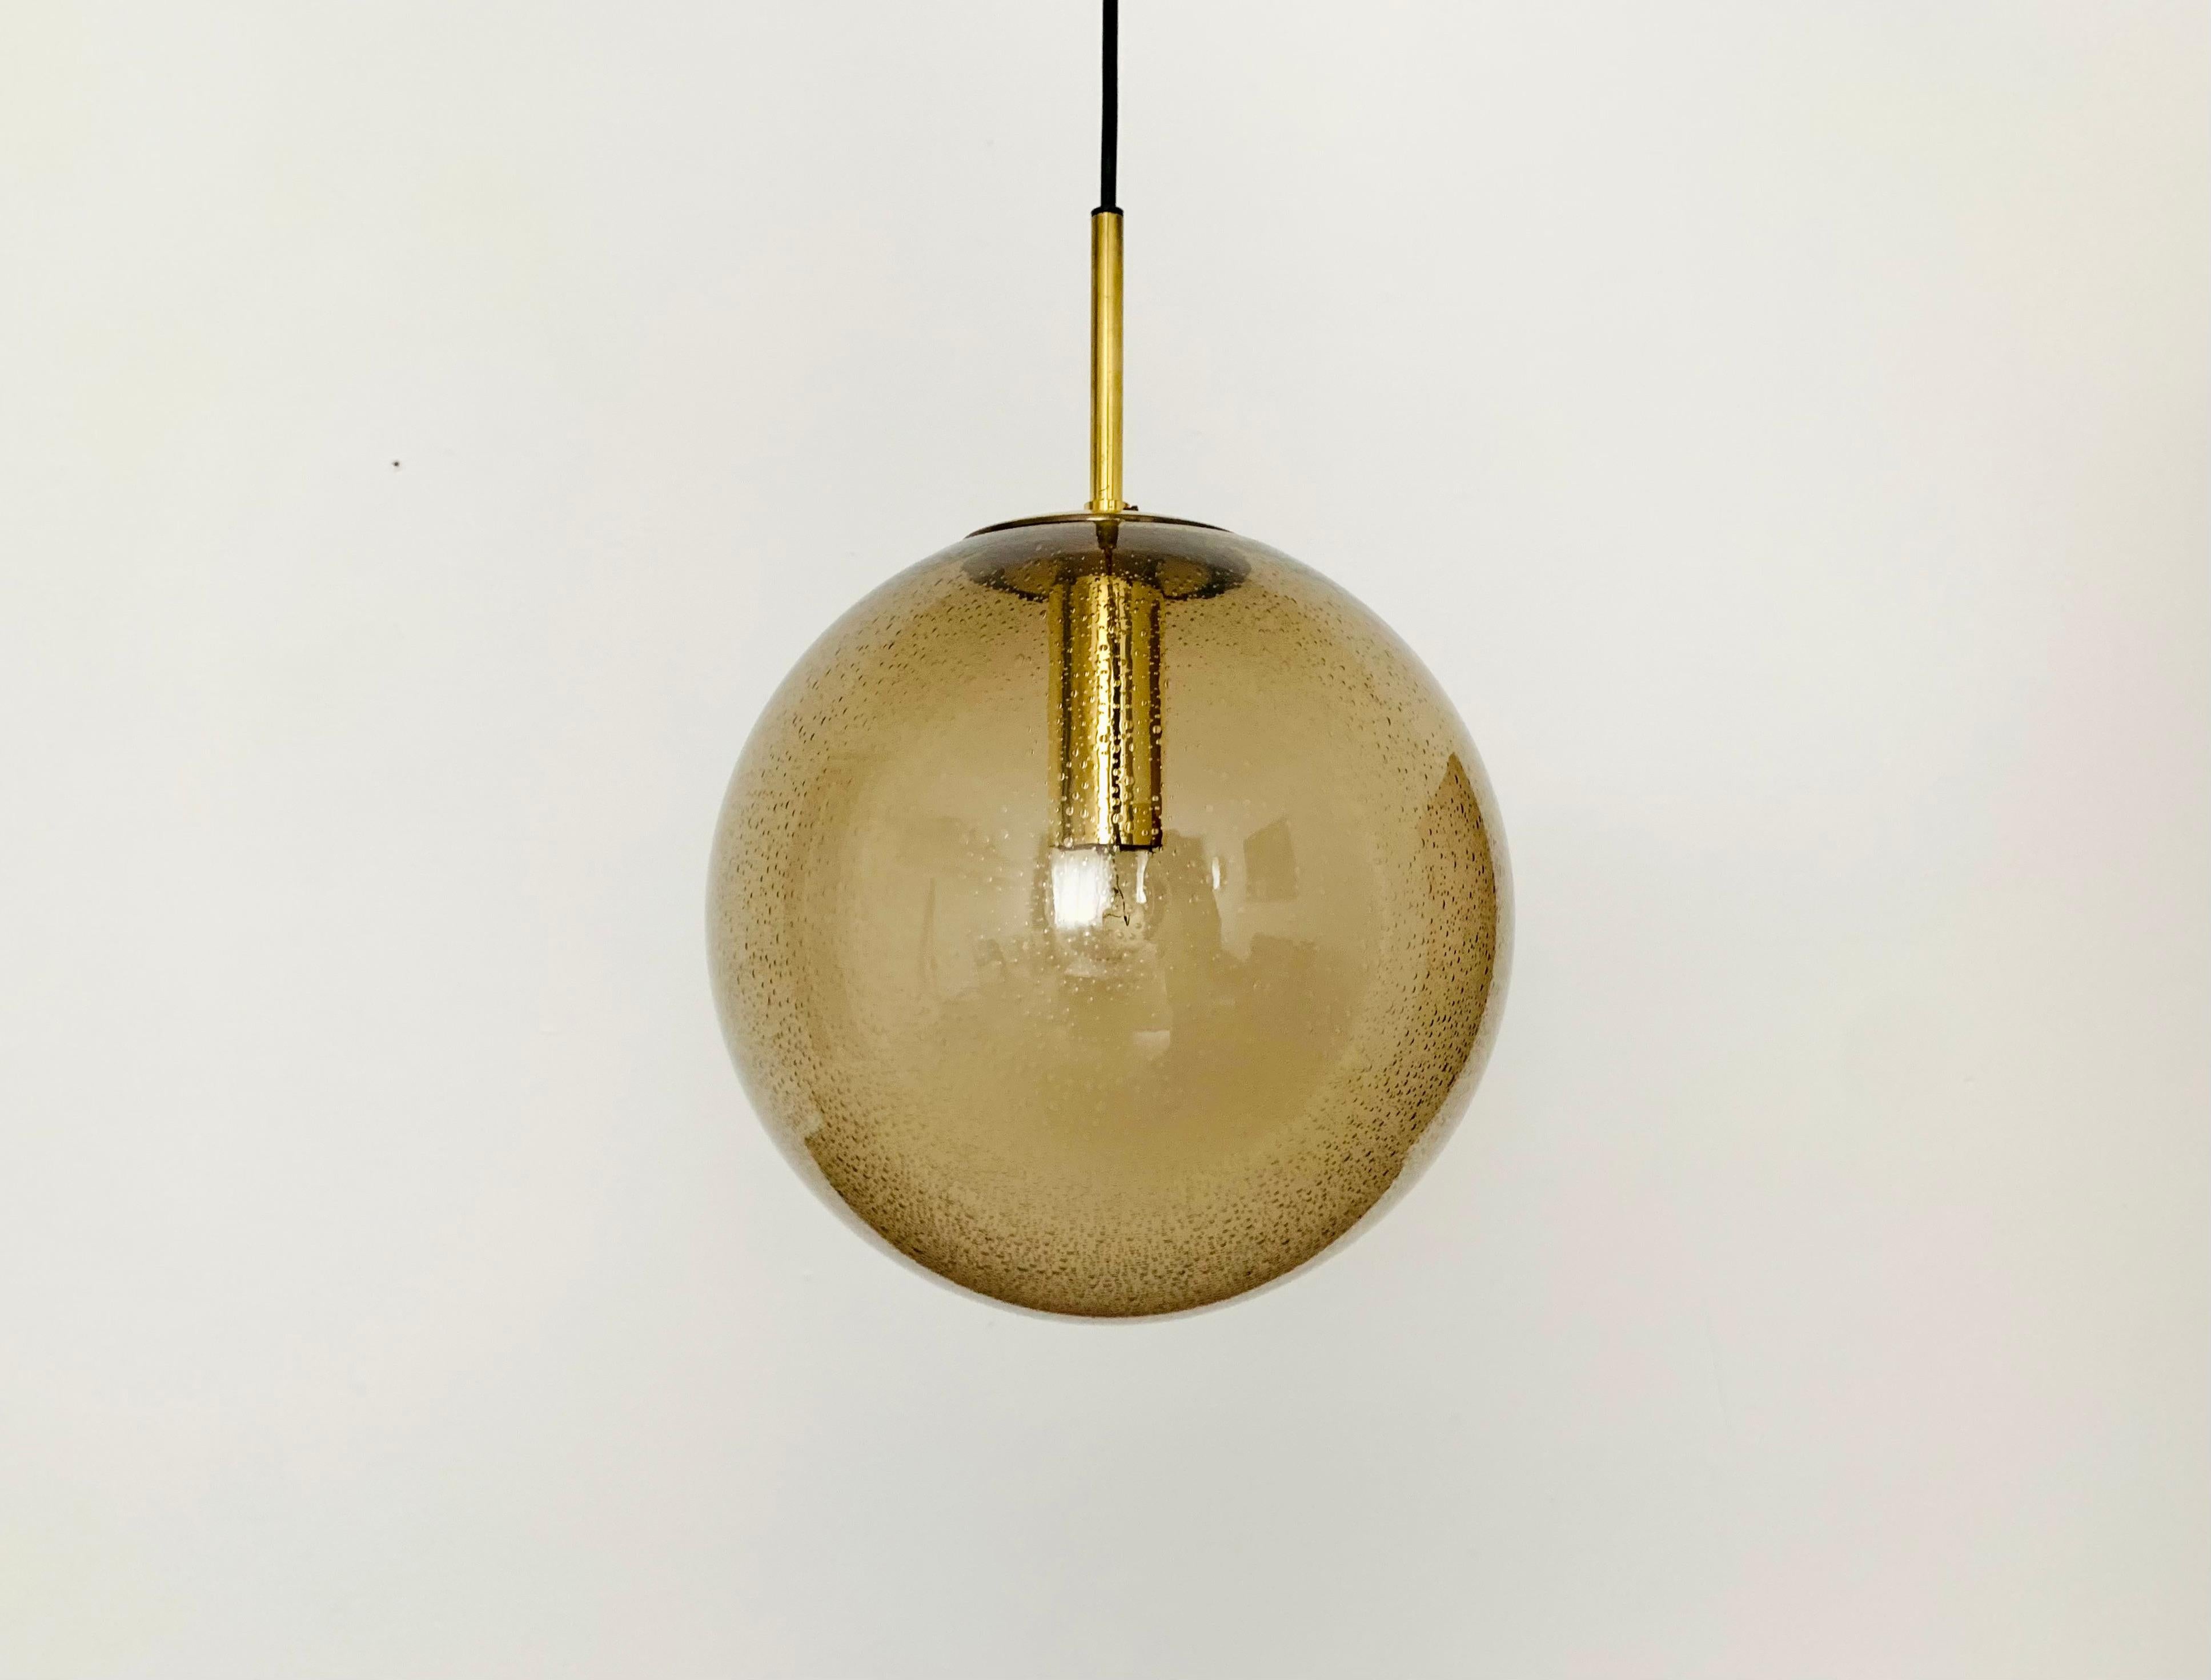 Fabulous bubble glass pendant lamp from the 1960s.
The lamp is very elegant and an eye-catcher in every room.
The structure in the glass creates a spectacular play of light.

Manufacturer: Glashütte Limburg

Condition:

Very good vintage condition